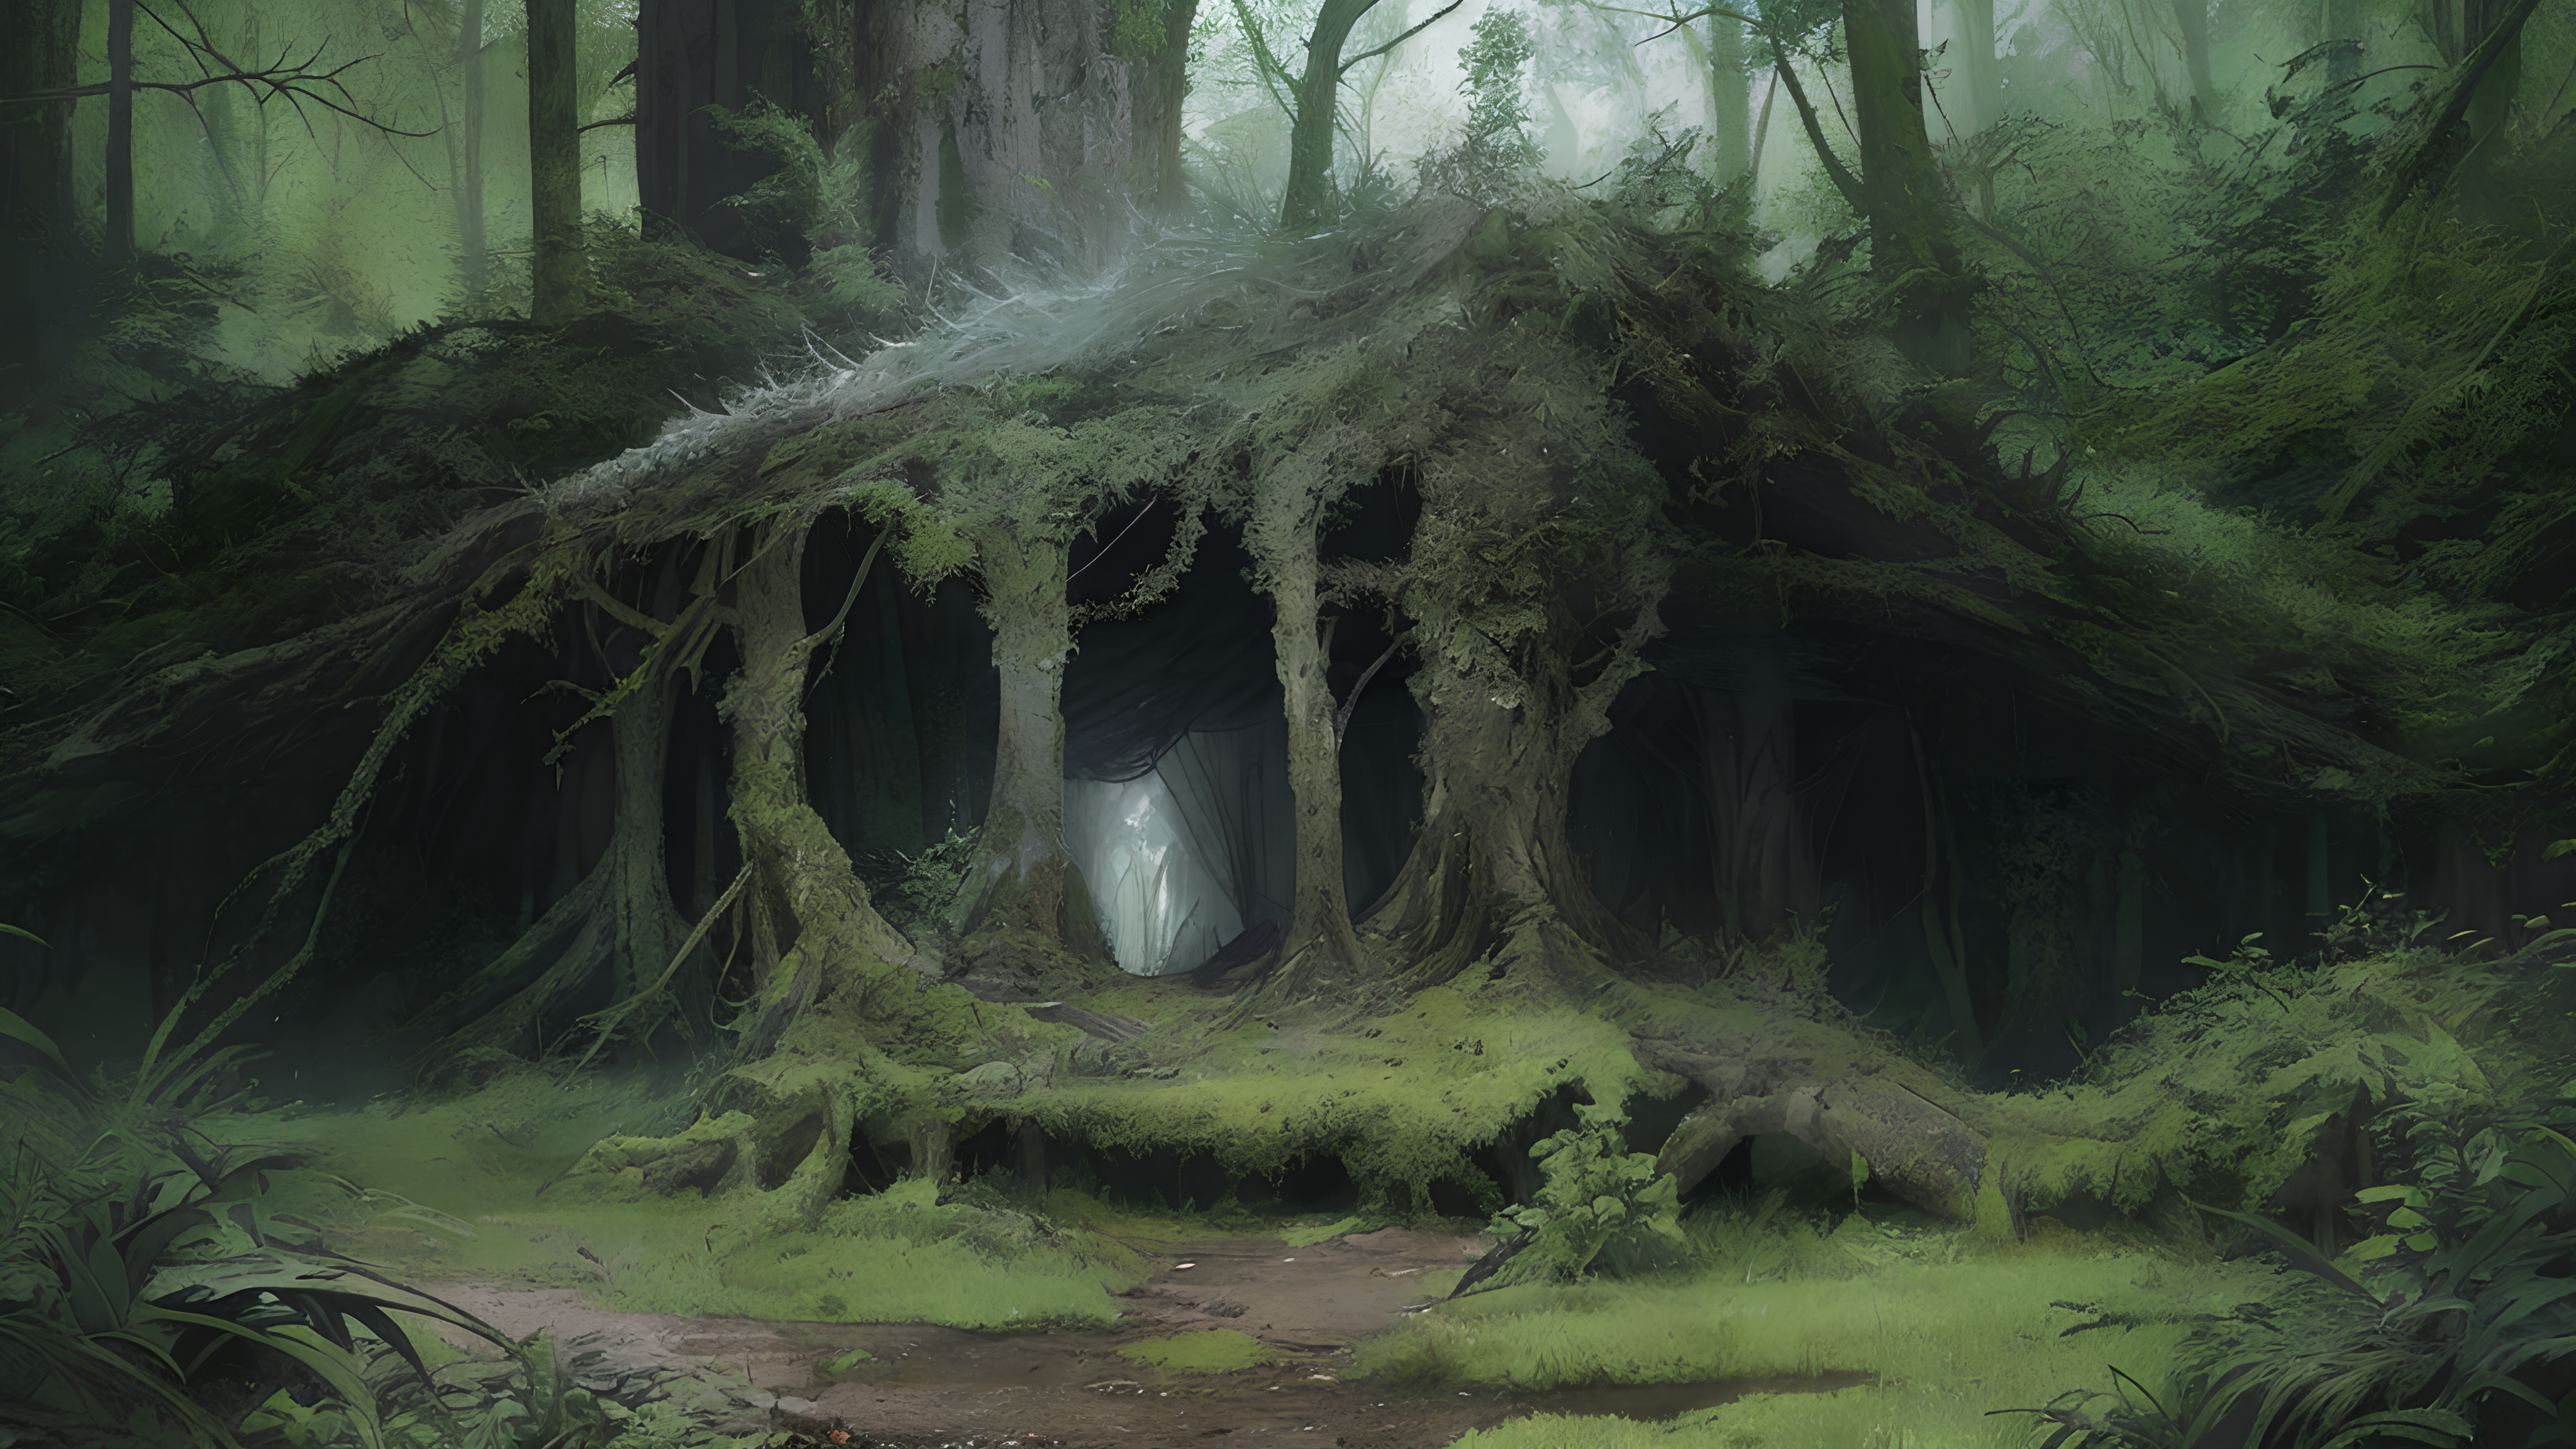 05417-3371188943-art, (hdr_1.5), in the woods, desolate dense savage selva, desolate strange weird misterious magic alien lair under moss roof,.png